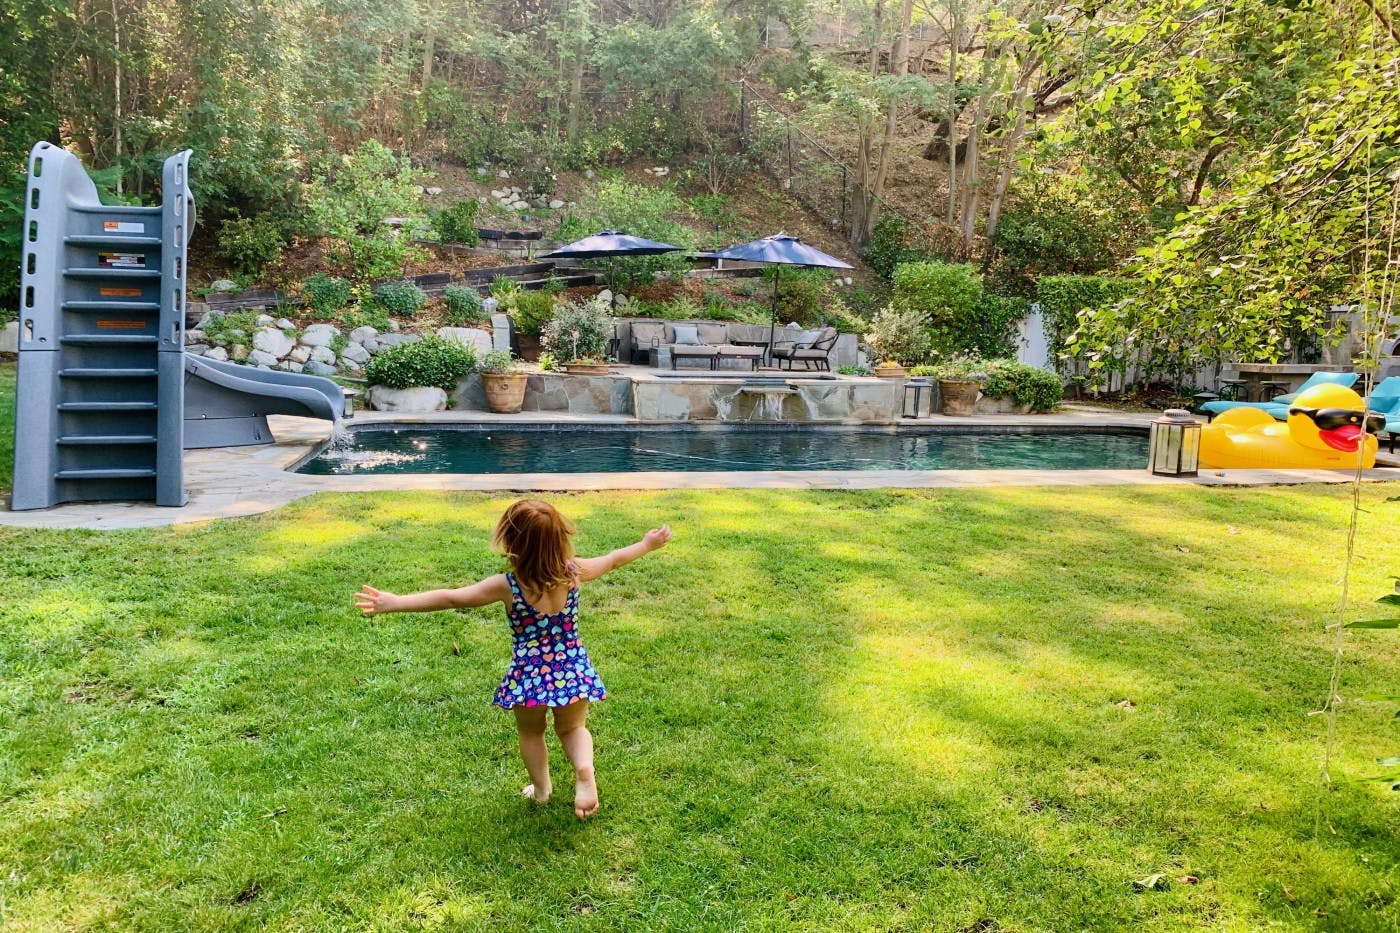 Awesome Pool & Slide At Super Private Oasis In Sherman Oaks!